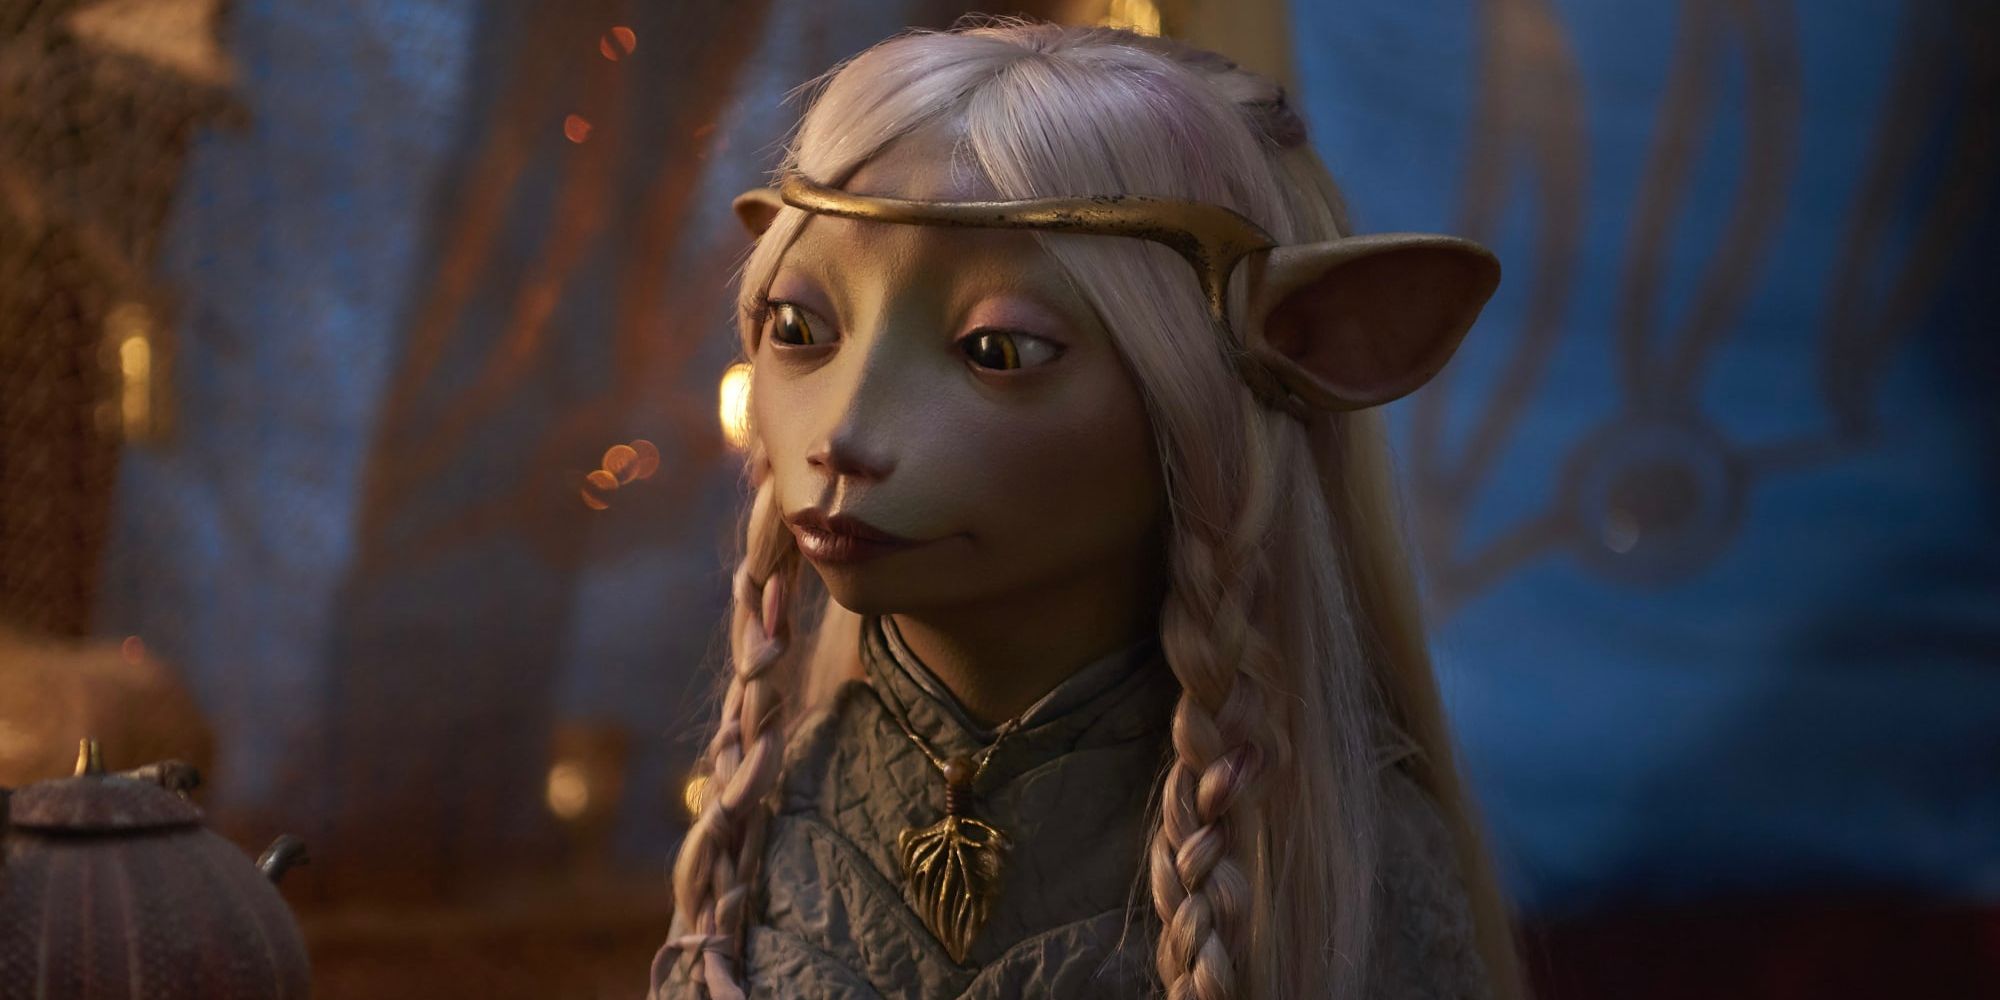 Tavra from 'The Dark Crystal: Age of Resistance' (2020)